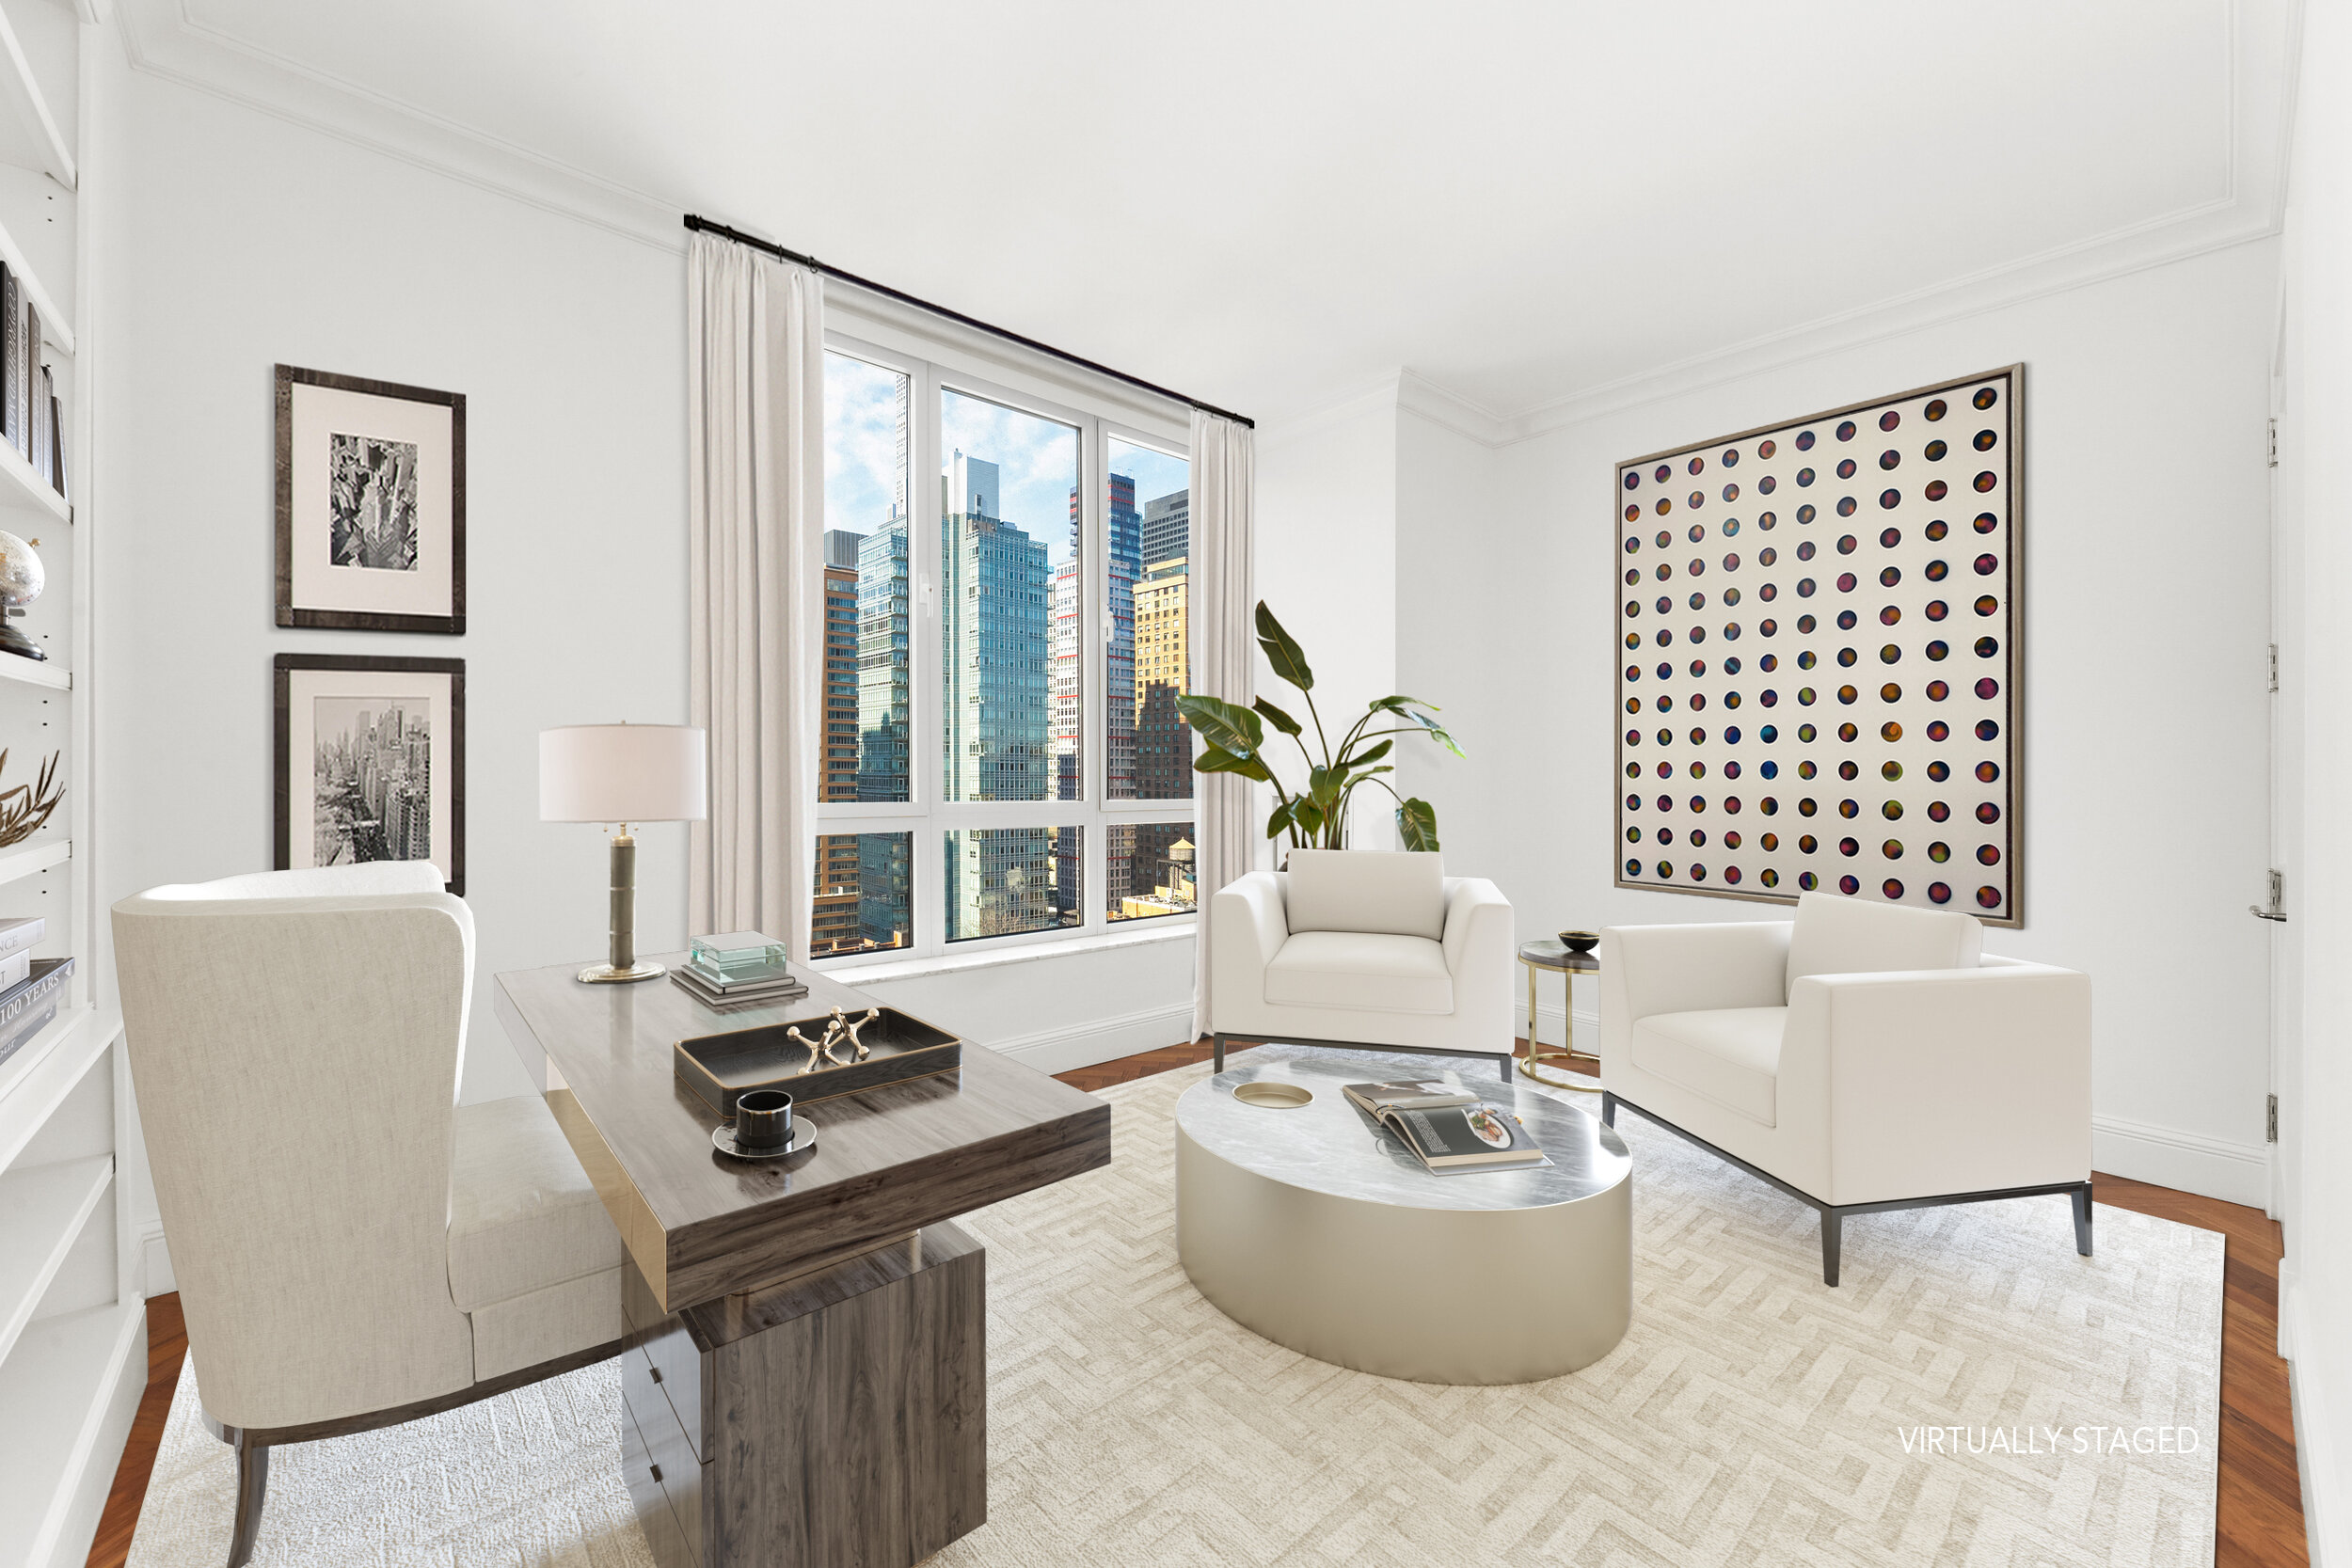  Sitting atop the timeless, pre-war building is The Penthouse Collection which offers a mix of oversized homes. Penthouse 2A is a 2,450 square foot, three-bedroom, three-bathroom duplex with two balconies and both Eastern and Western exposures, offer